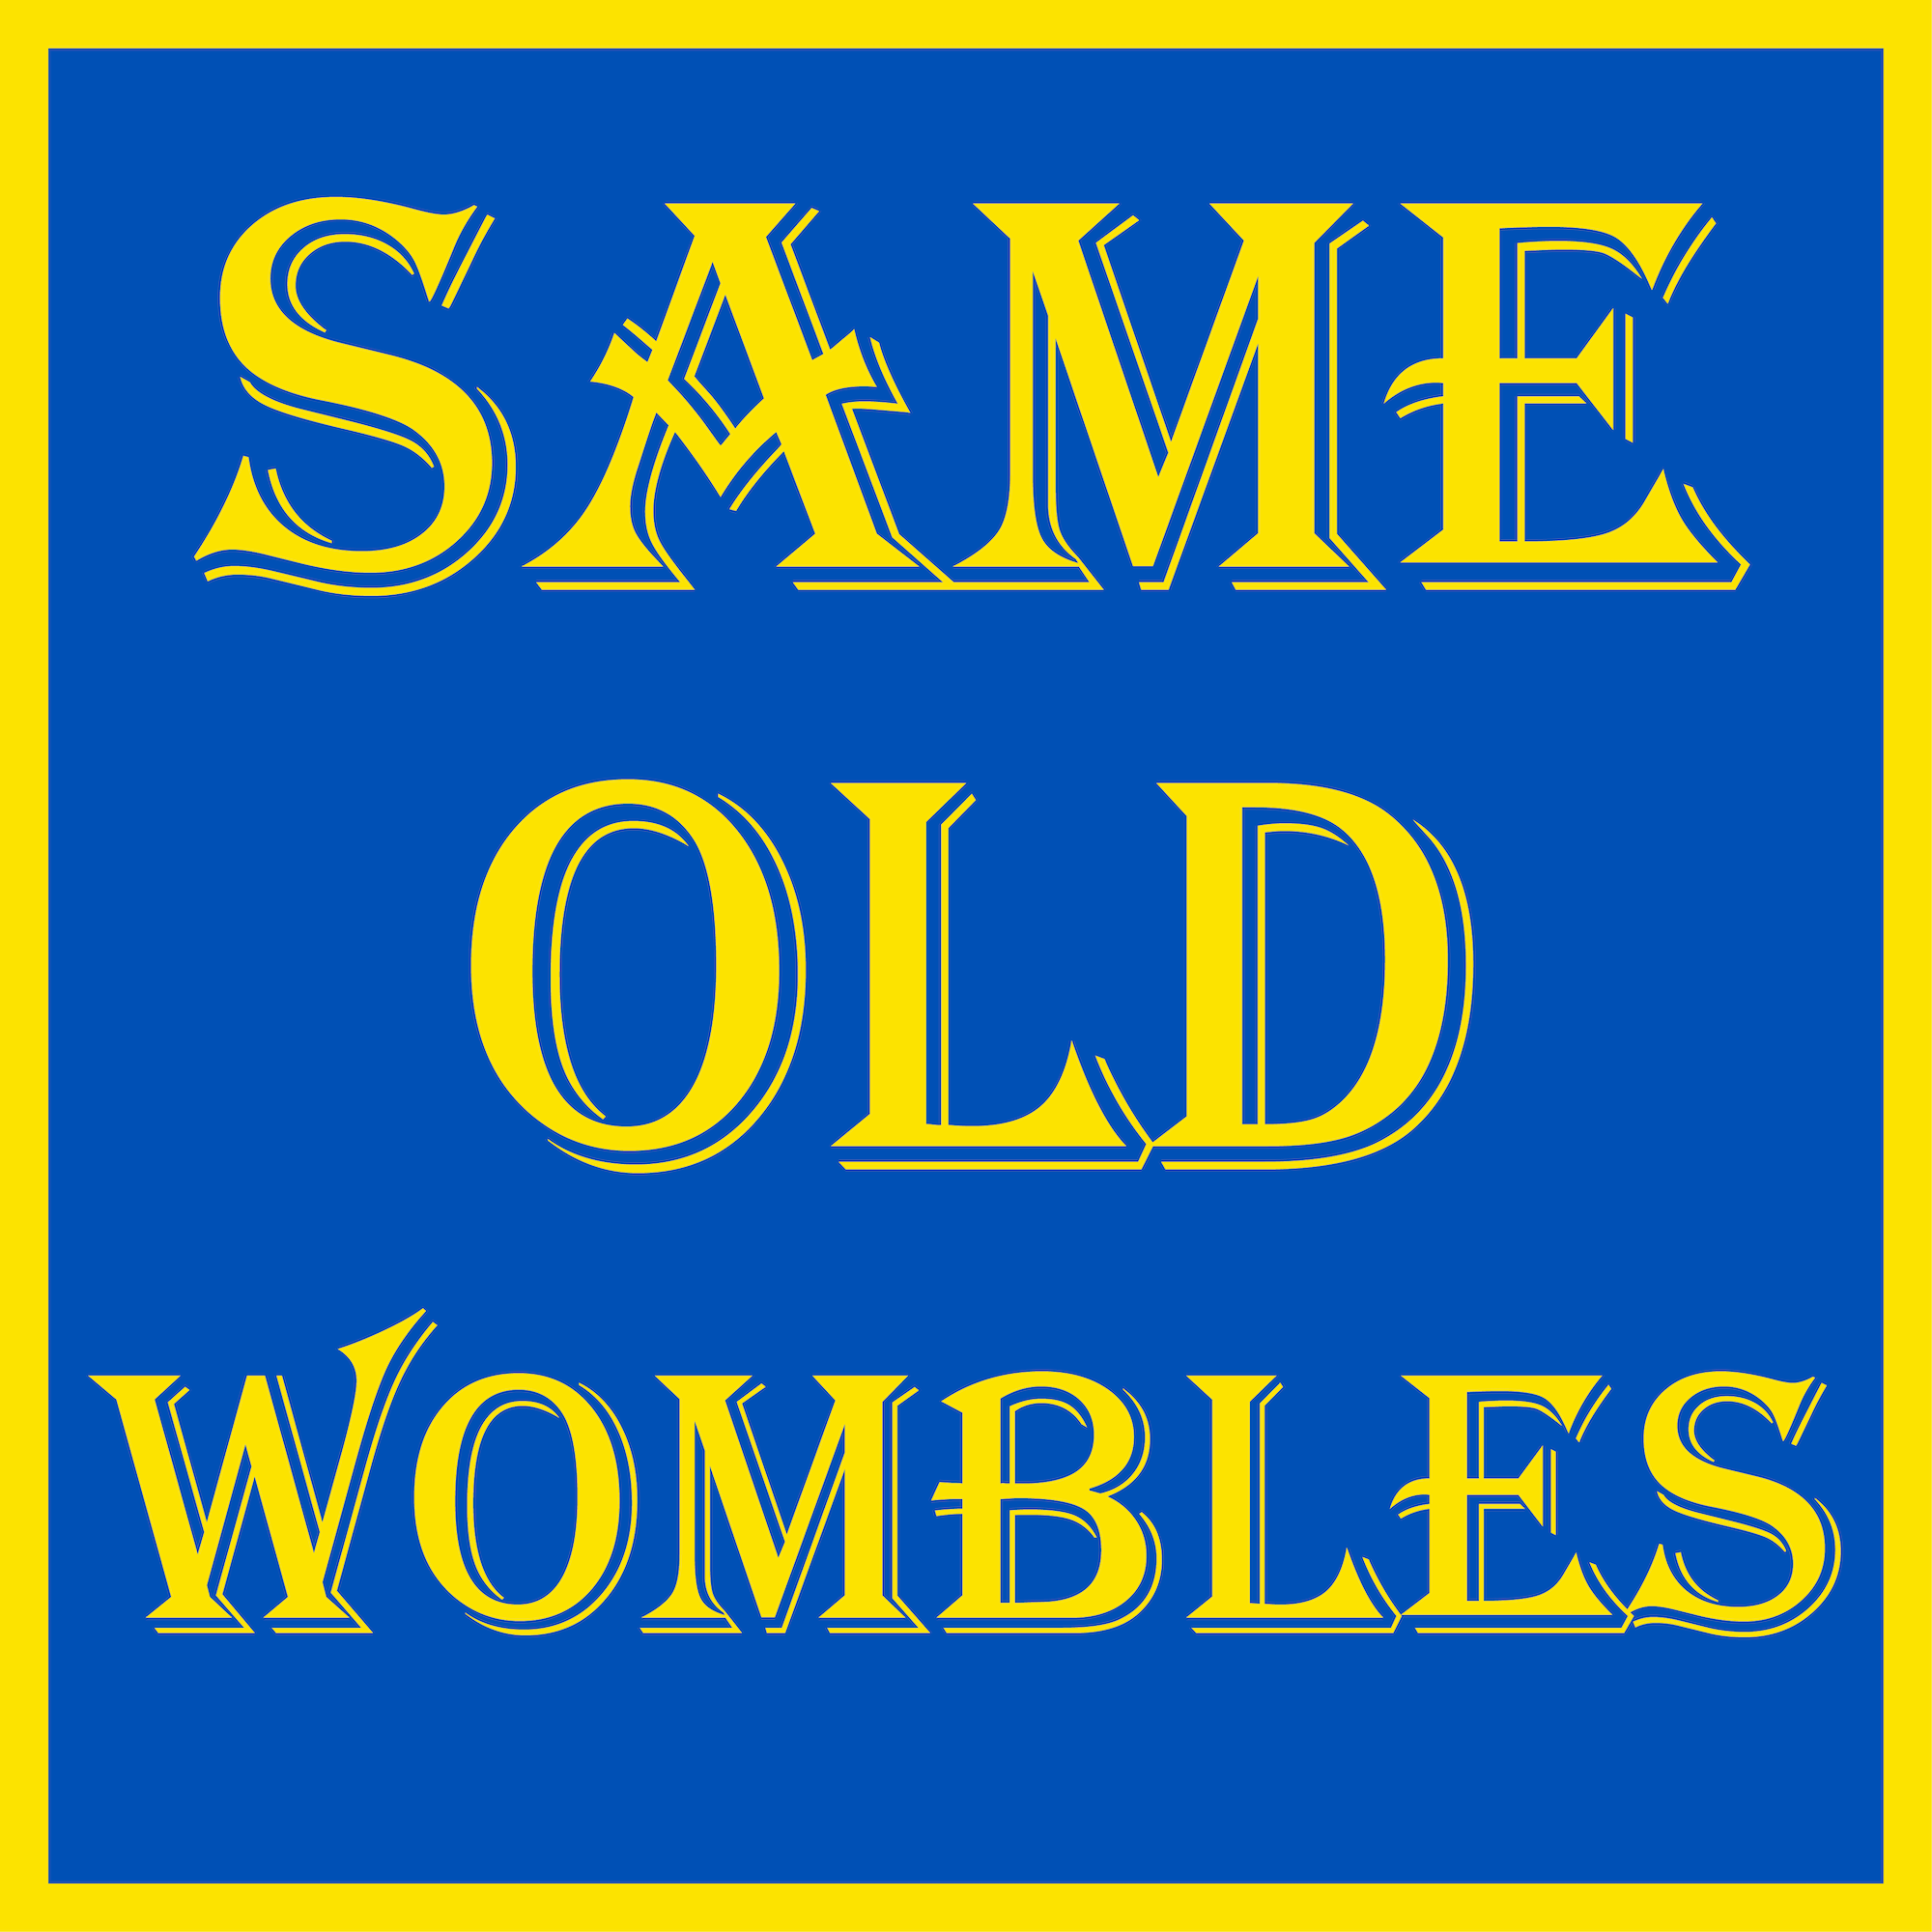 Same Old Wombles